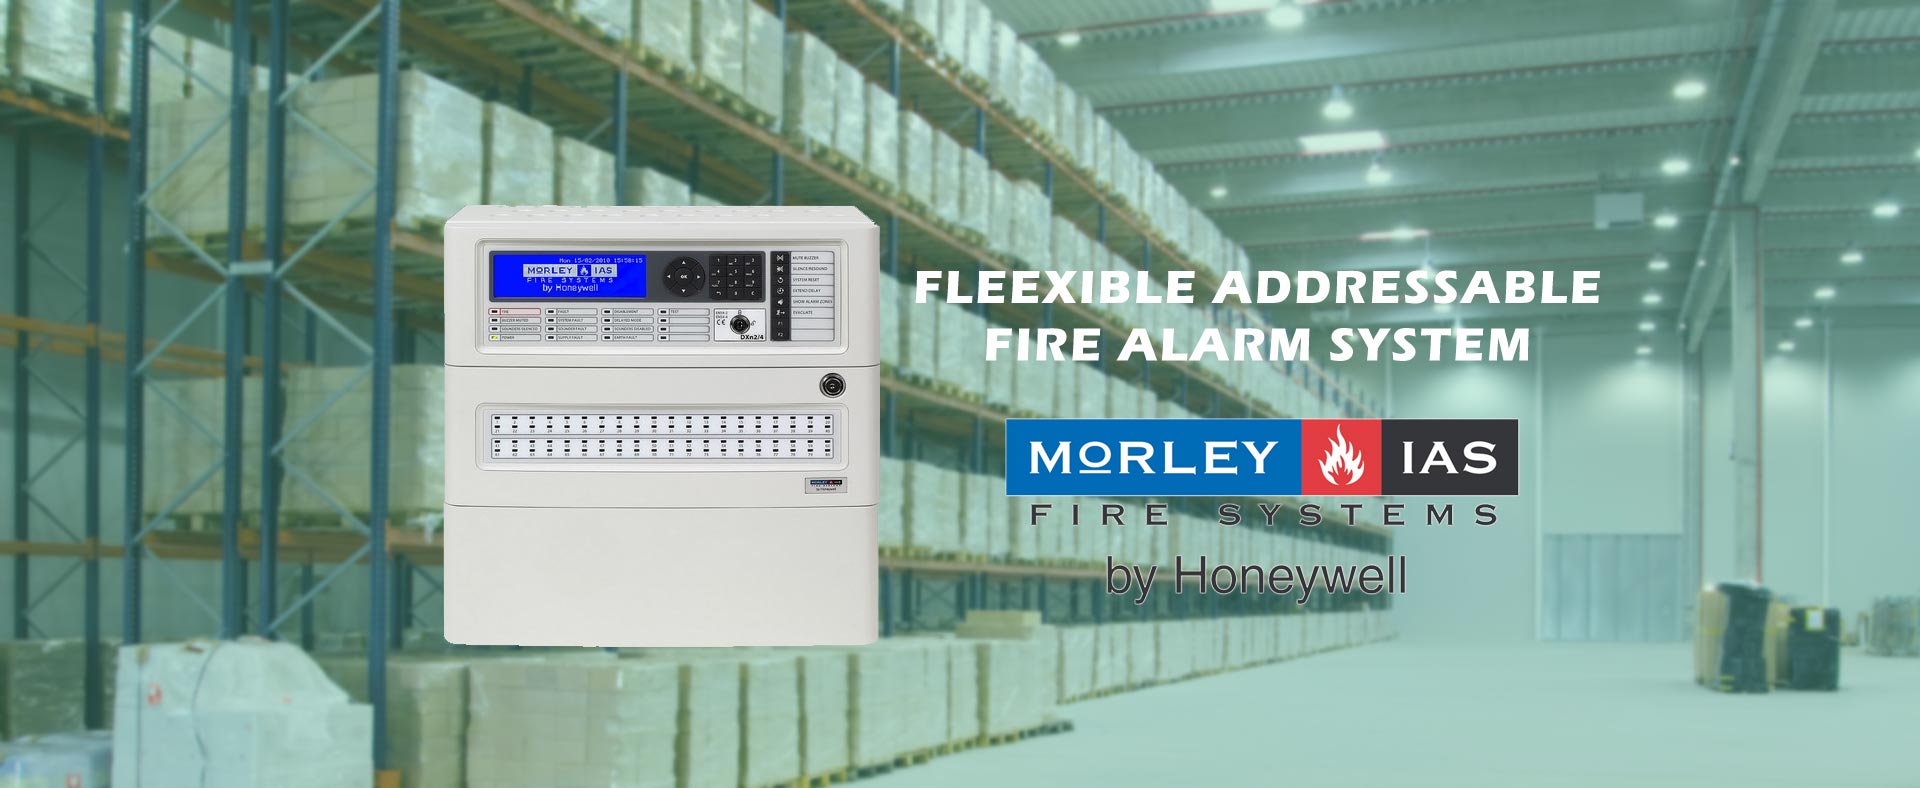 Addressable fire alarm system in Nepal